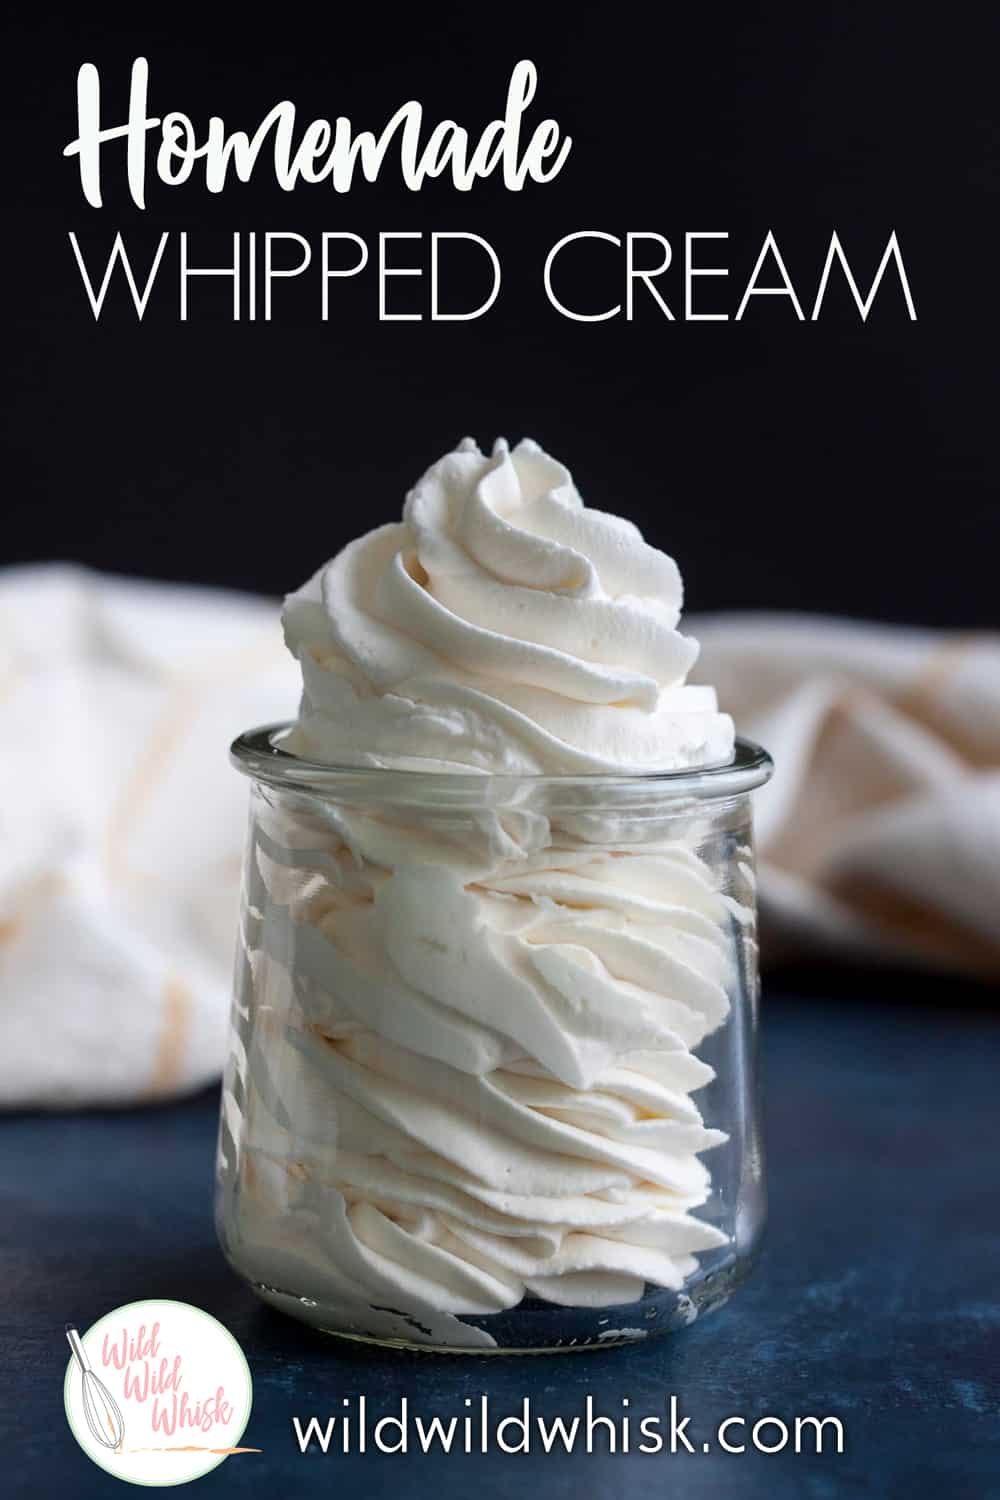 Homemade Whipped Cream is so easy to make, and so much more delicious than the store-bought version. It’s the perfect accompaniment to all your favorite desserts like pie, ice cream, and hot chocolate. | wildwildwhisk.com #whippedcream